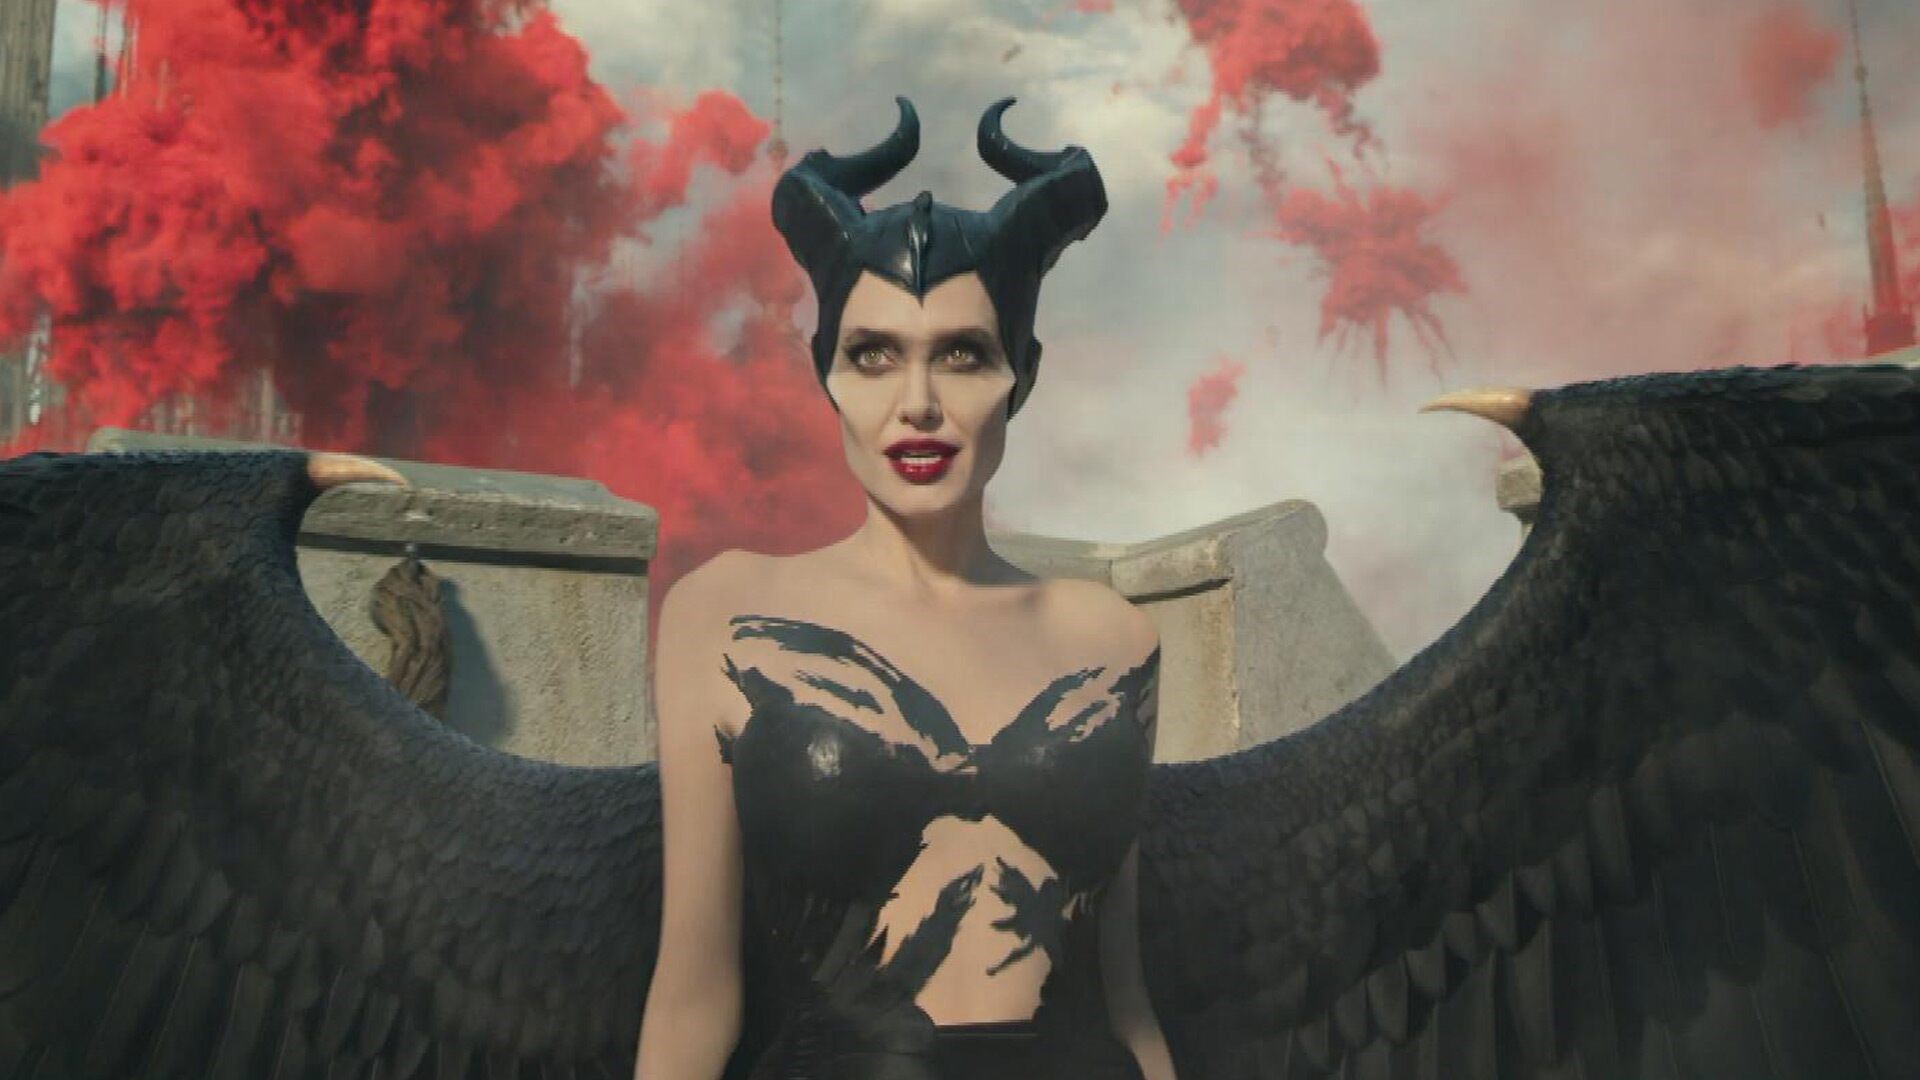 Facts About The Evil Witch Maleficent